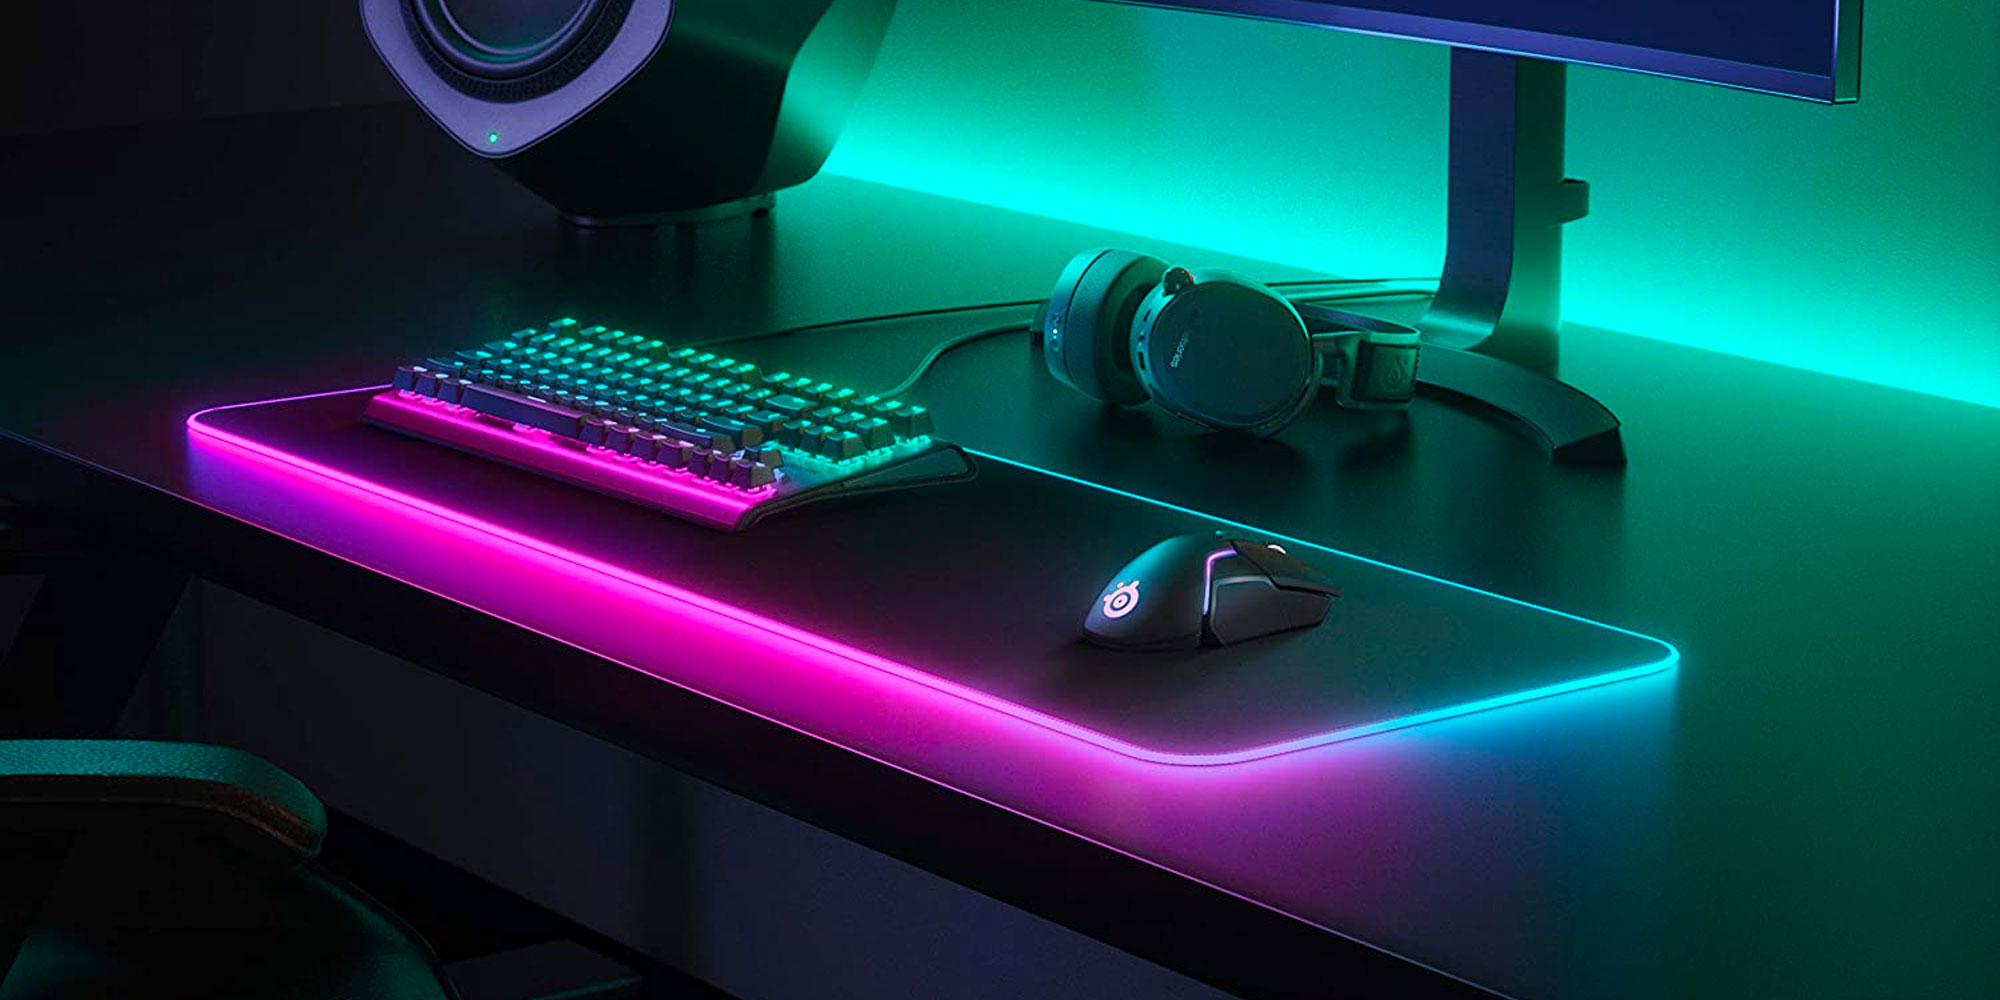 SteelSeries QcK RGB Prism gaming mouse pad takes your setup to the